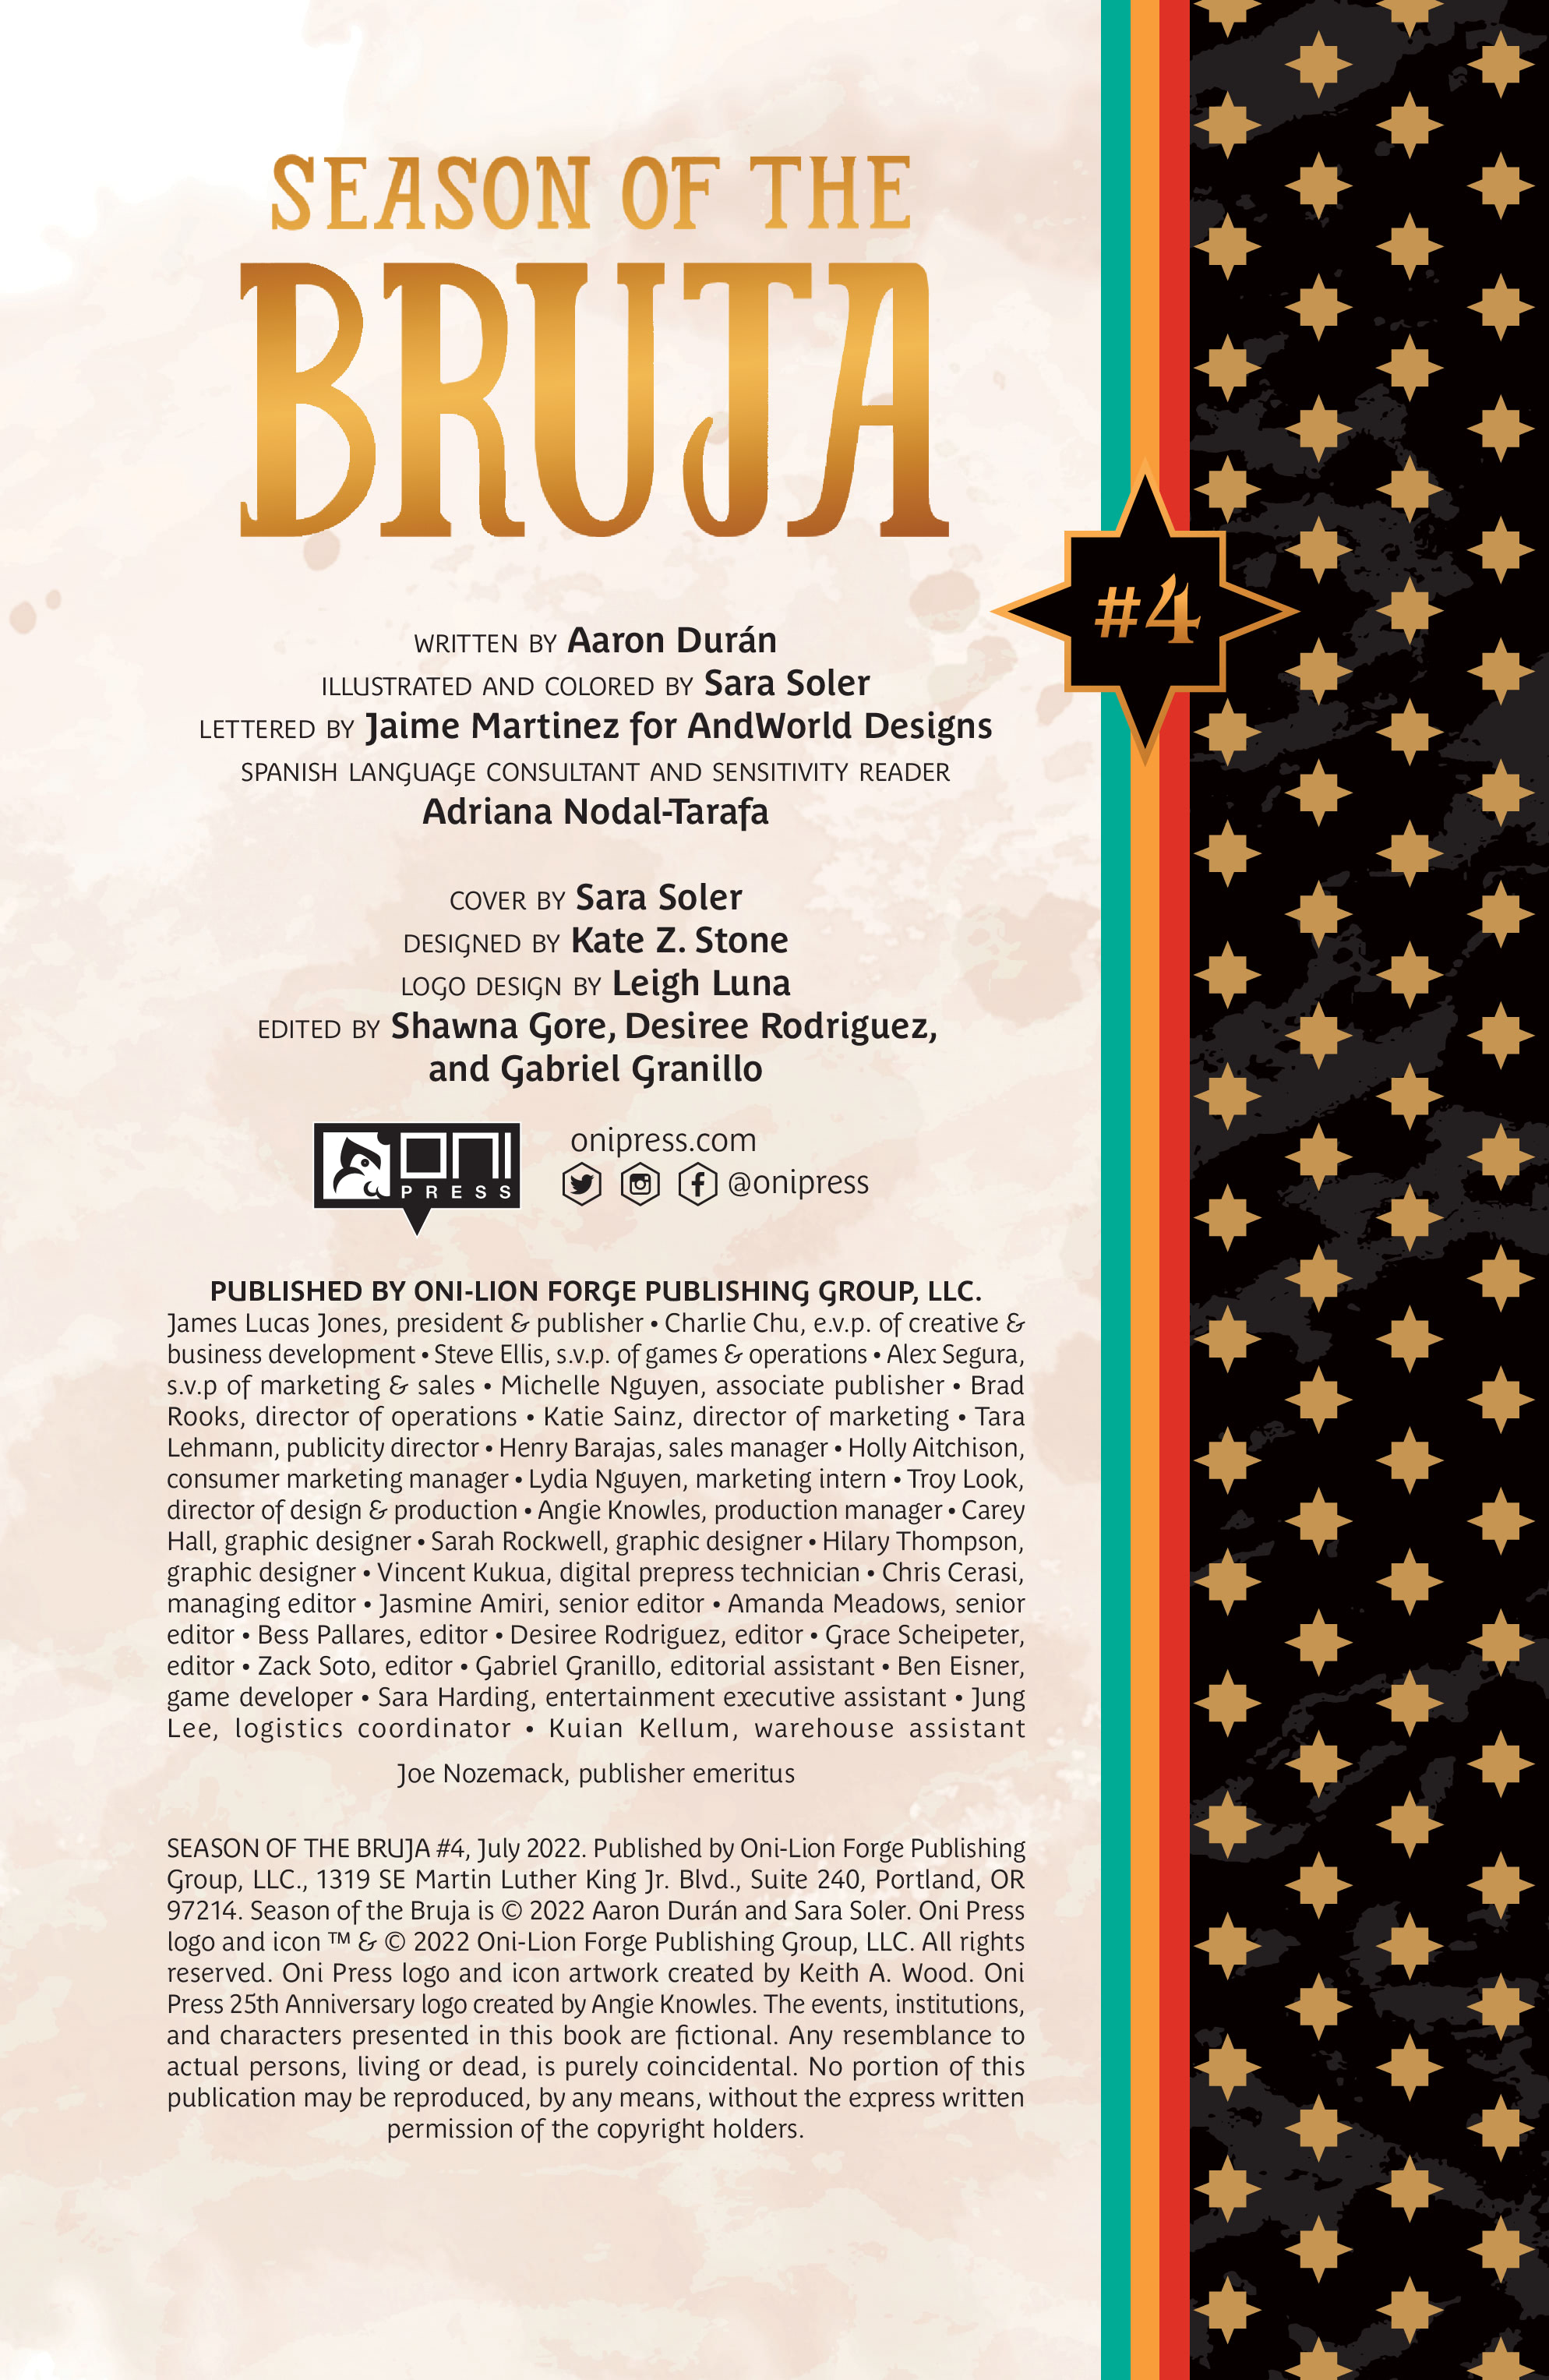 Read online Season of the Bruja comic -  Issue #4 - 2